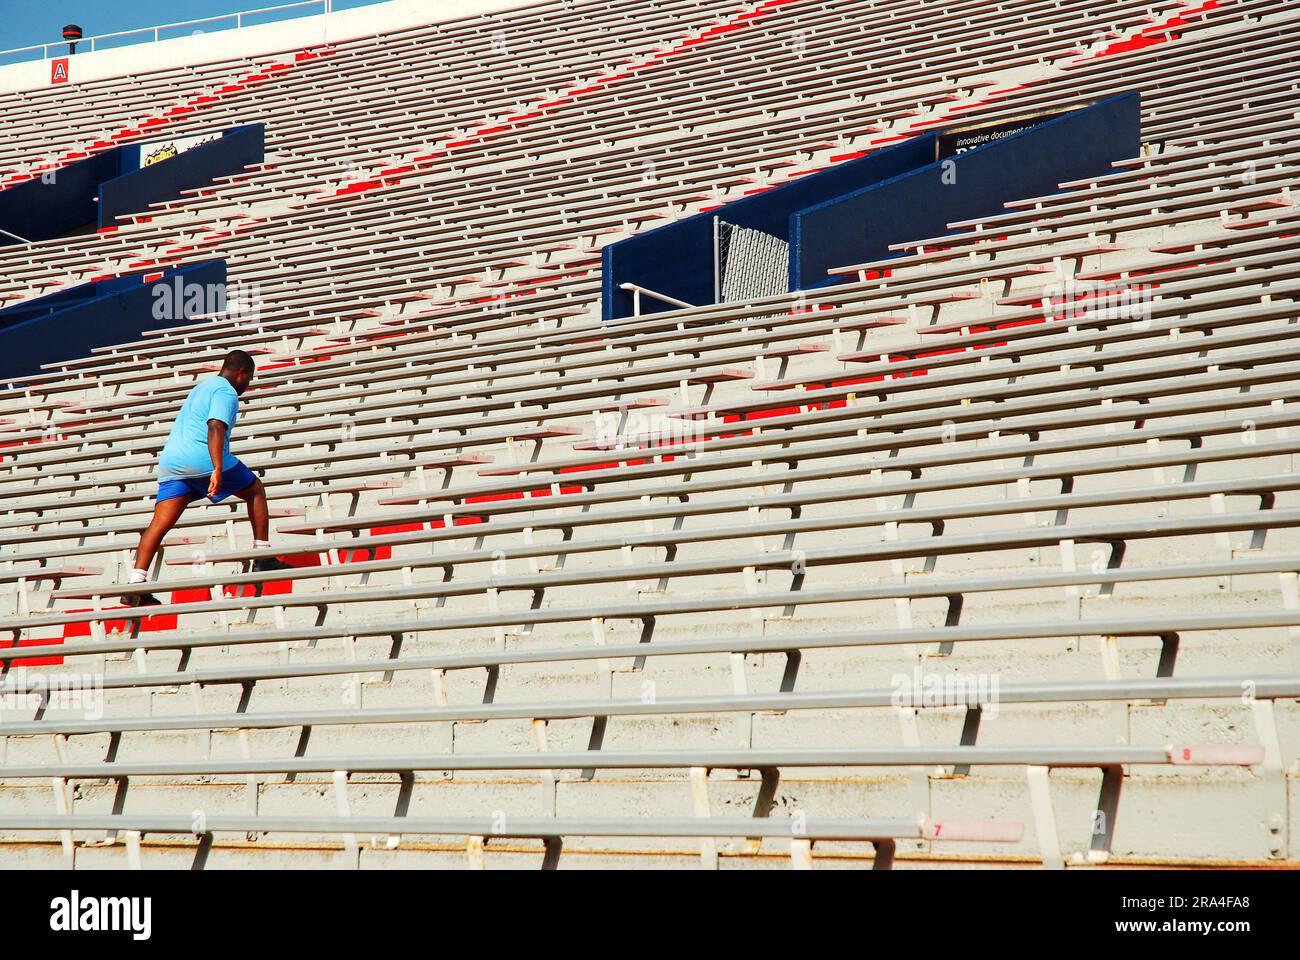 A college athlete uses the steps of the Vaught Hemmingway Stadium at the University of Mississippi as part of his exercise and conditioning routine Stock Photo